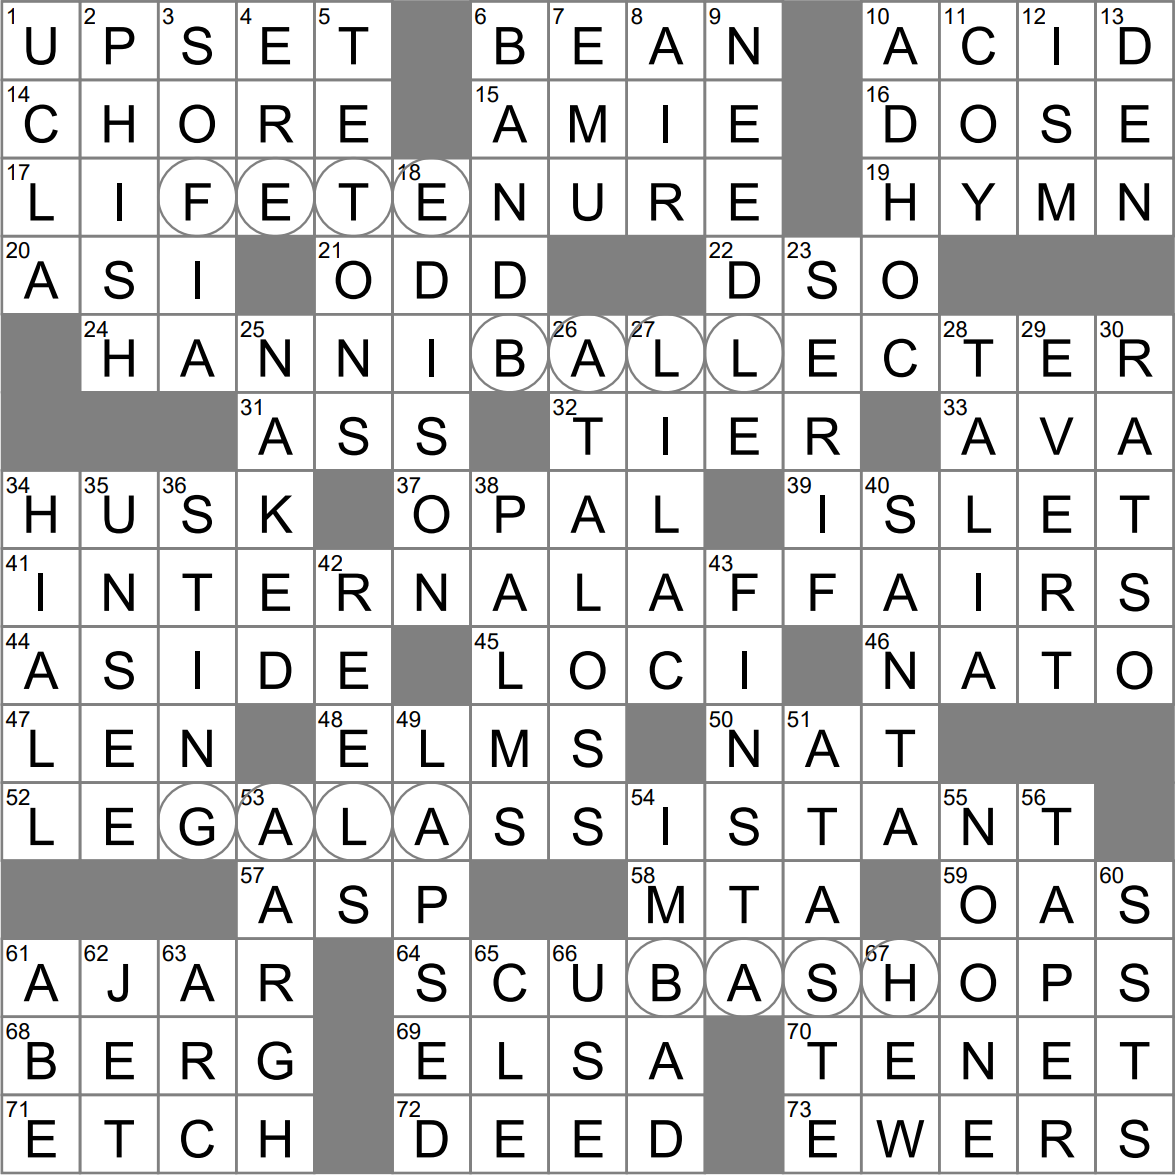 la-times-crossword-2-may-23-tuesday-laxcrossword